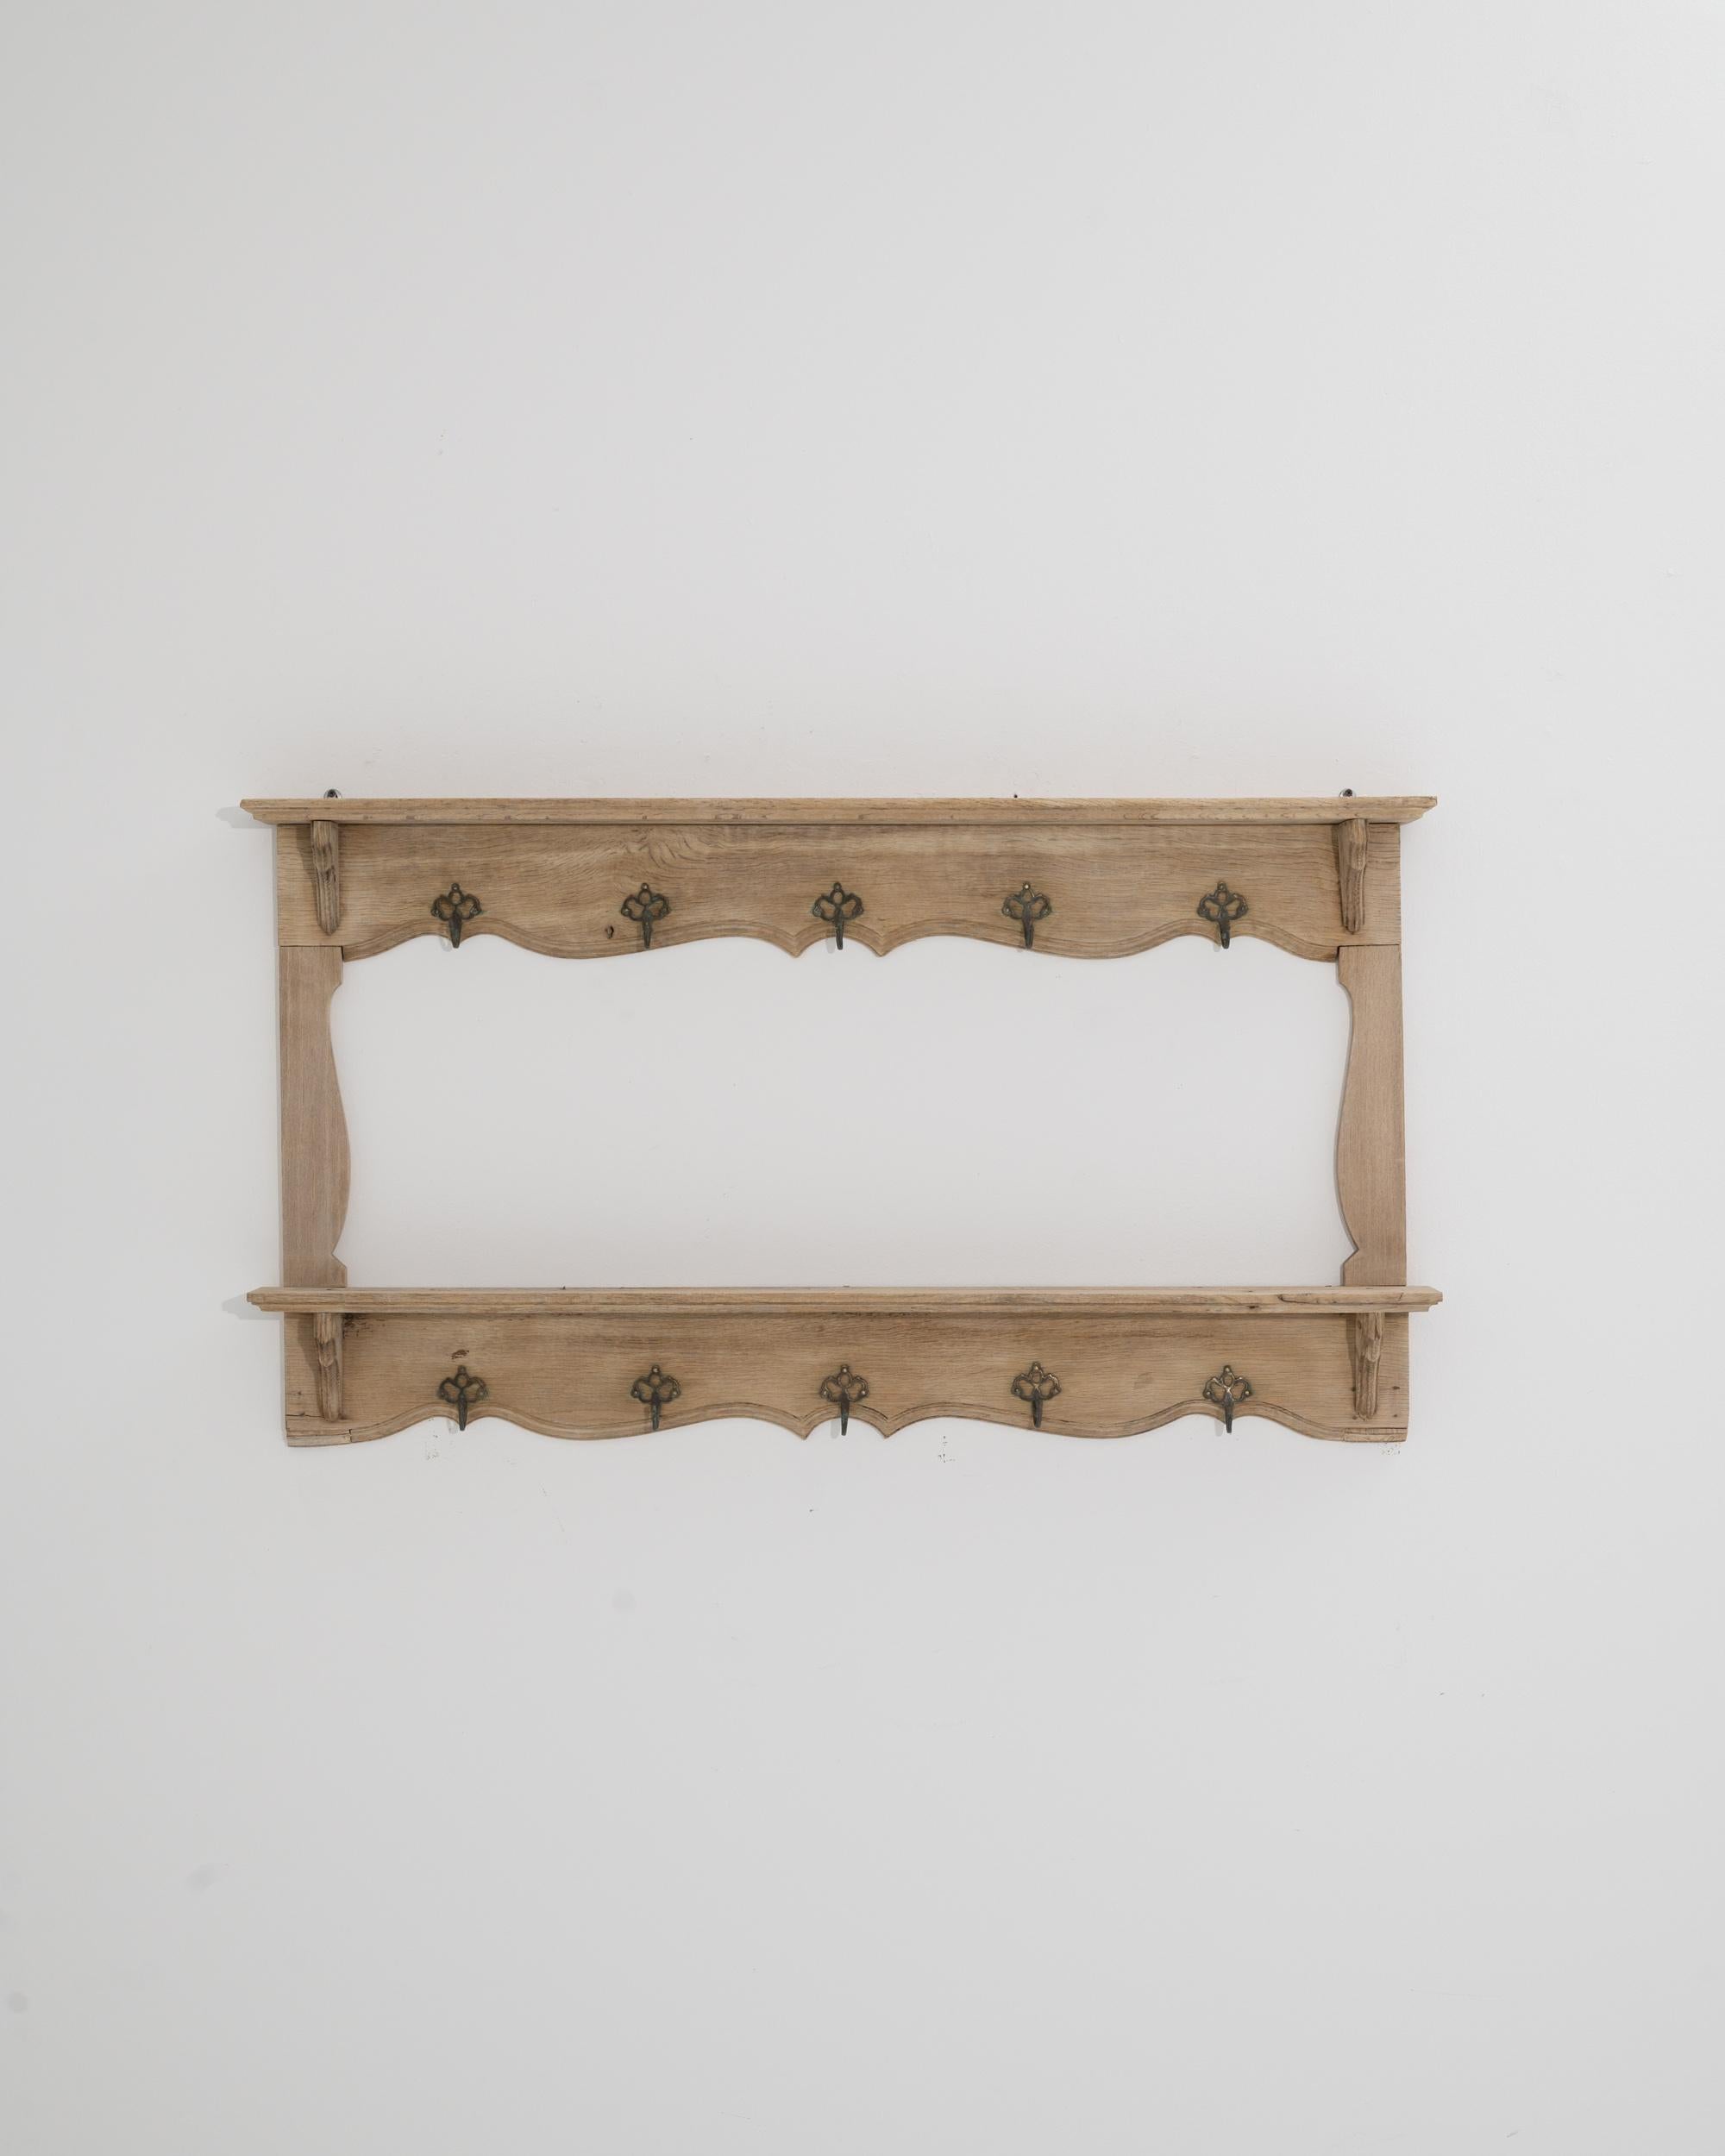 A wooden wall rack, circa Belgium 1910. Lined with ten hooks, five on top for hats and scarves, and five below for jackets and coats, this charmingly rustic wall rack offers ample storage functionality. Gently carved scroll patterning and detailed